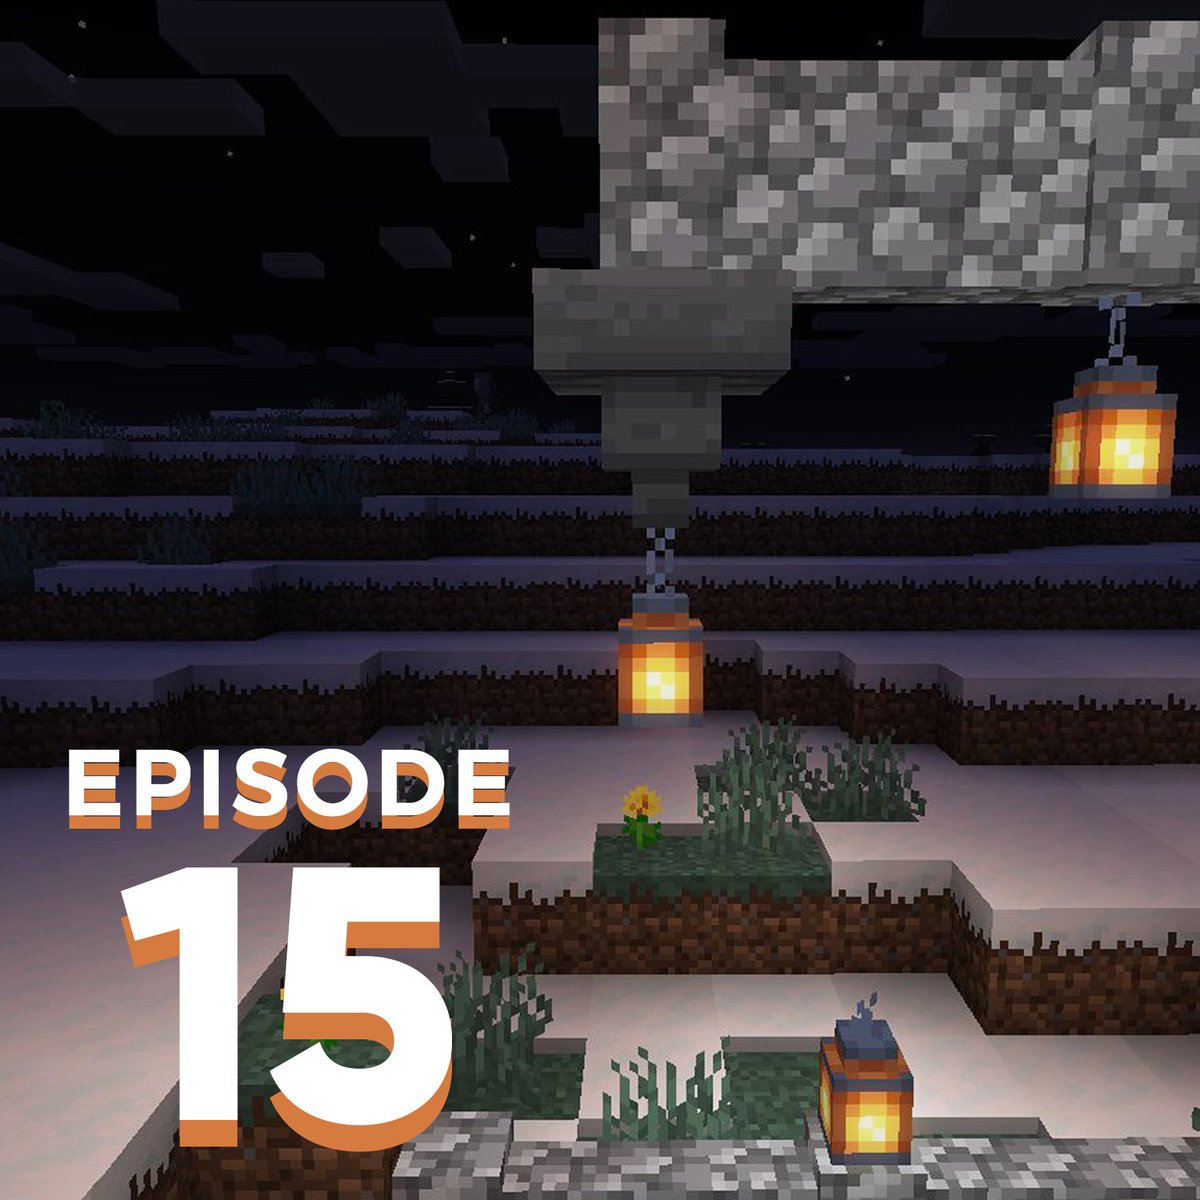 Thespawnchunks The Spawn Chunks Ep 15 Pixlriffs And Joelduggan Speculate On Illager Patrol Mechanics Give First Impressions Of The New Scaffolding Block And Shed Light On A Few Other